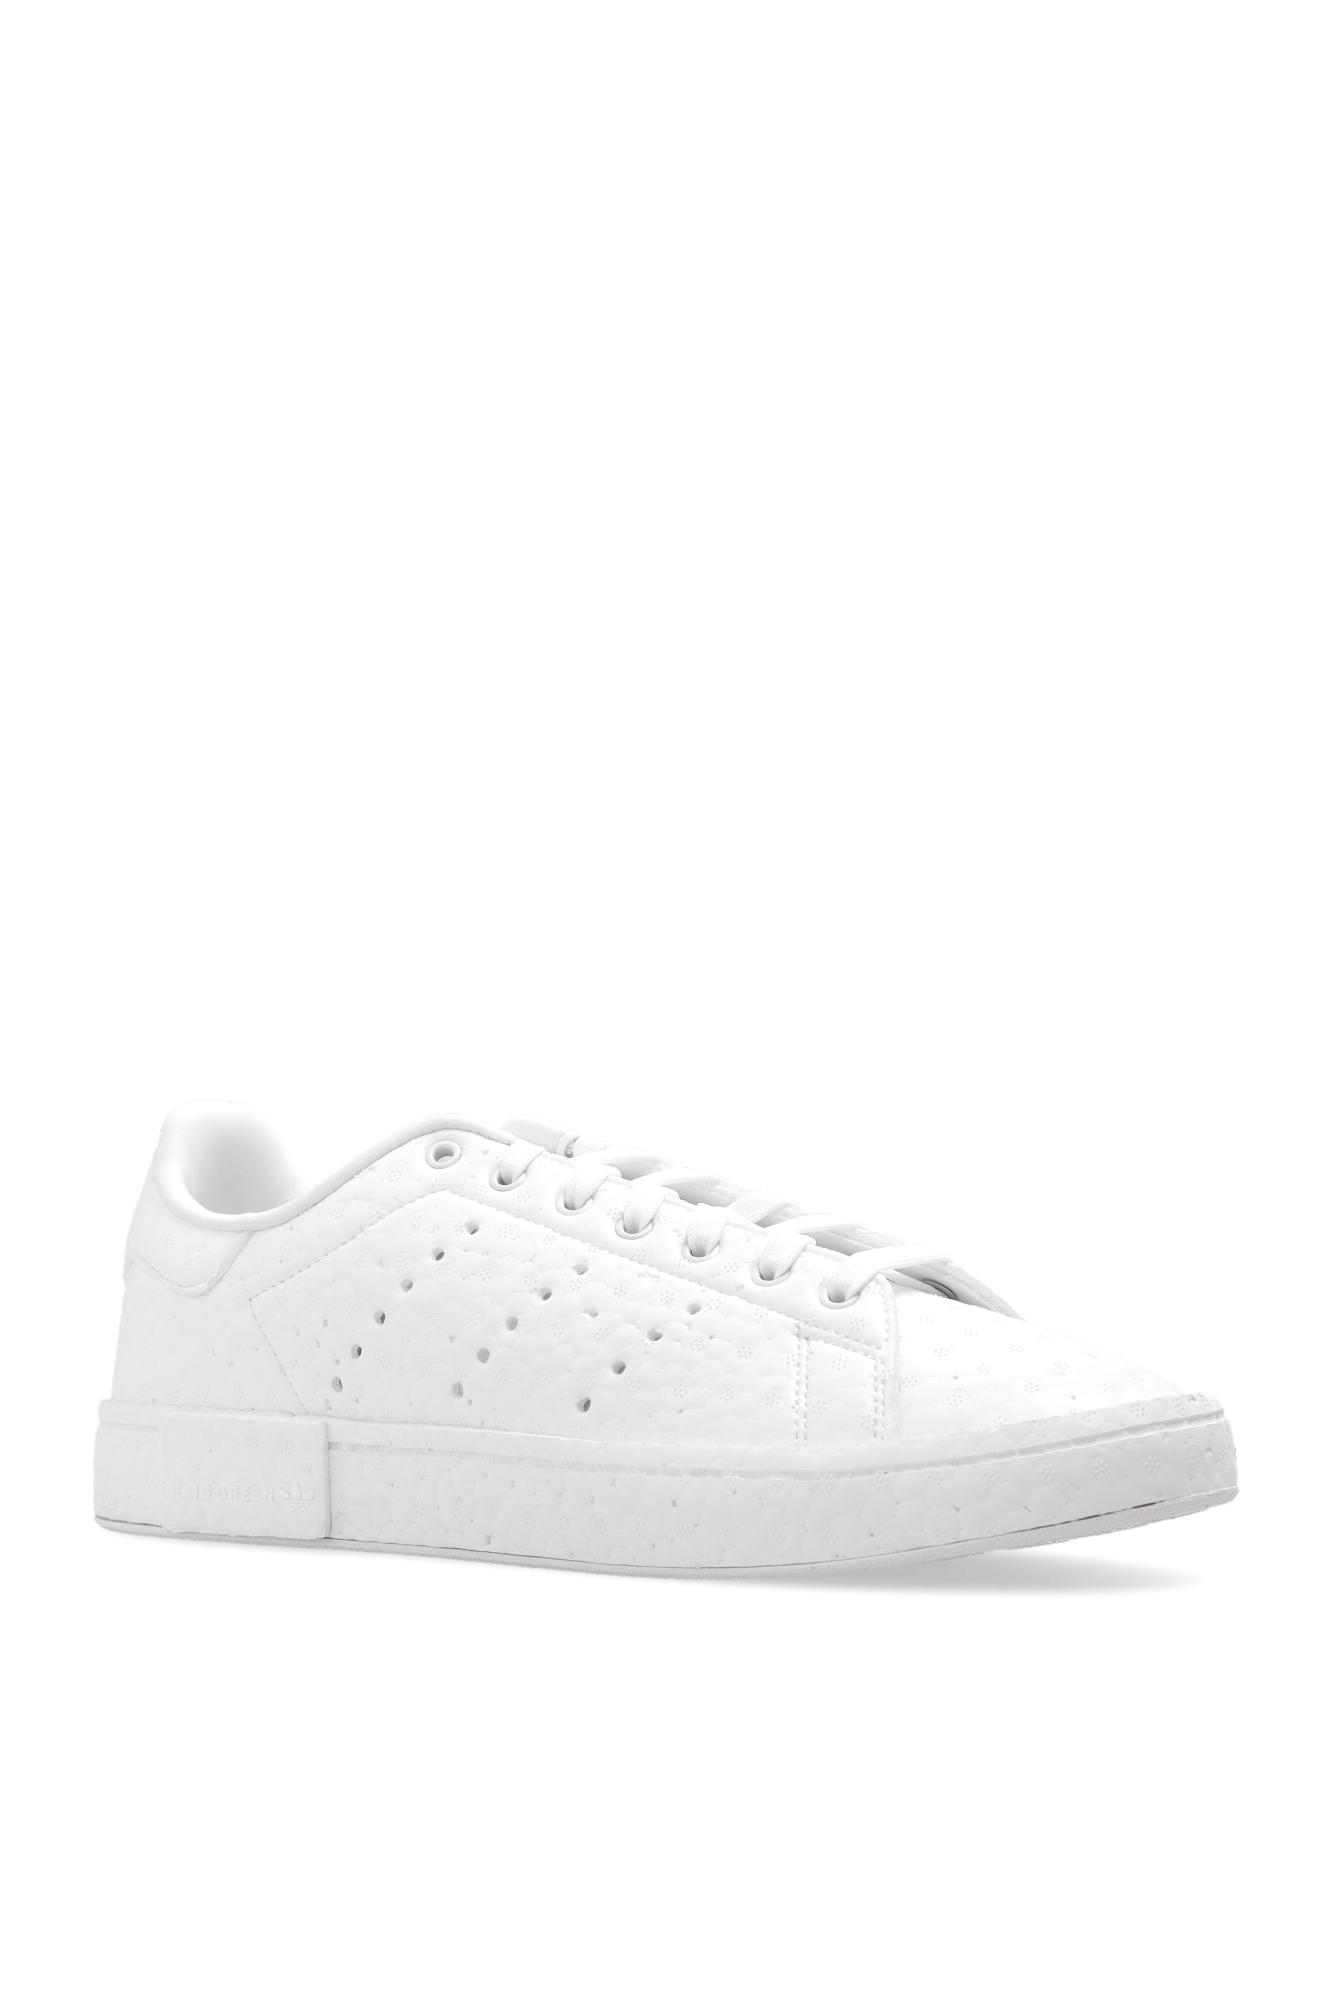 adidas Originals 'craig Green Stan Smith Boost' Sneakers in White | Lyst